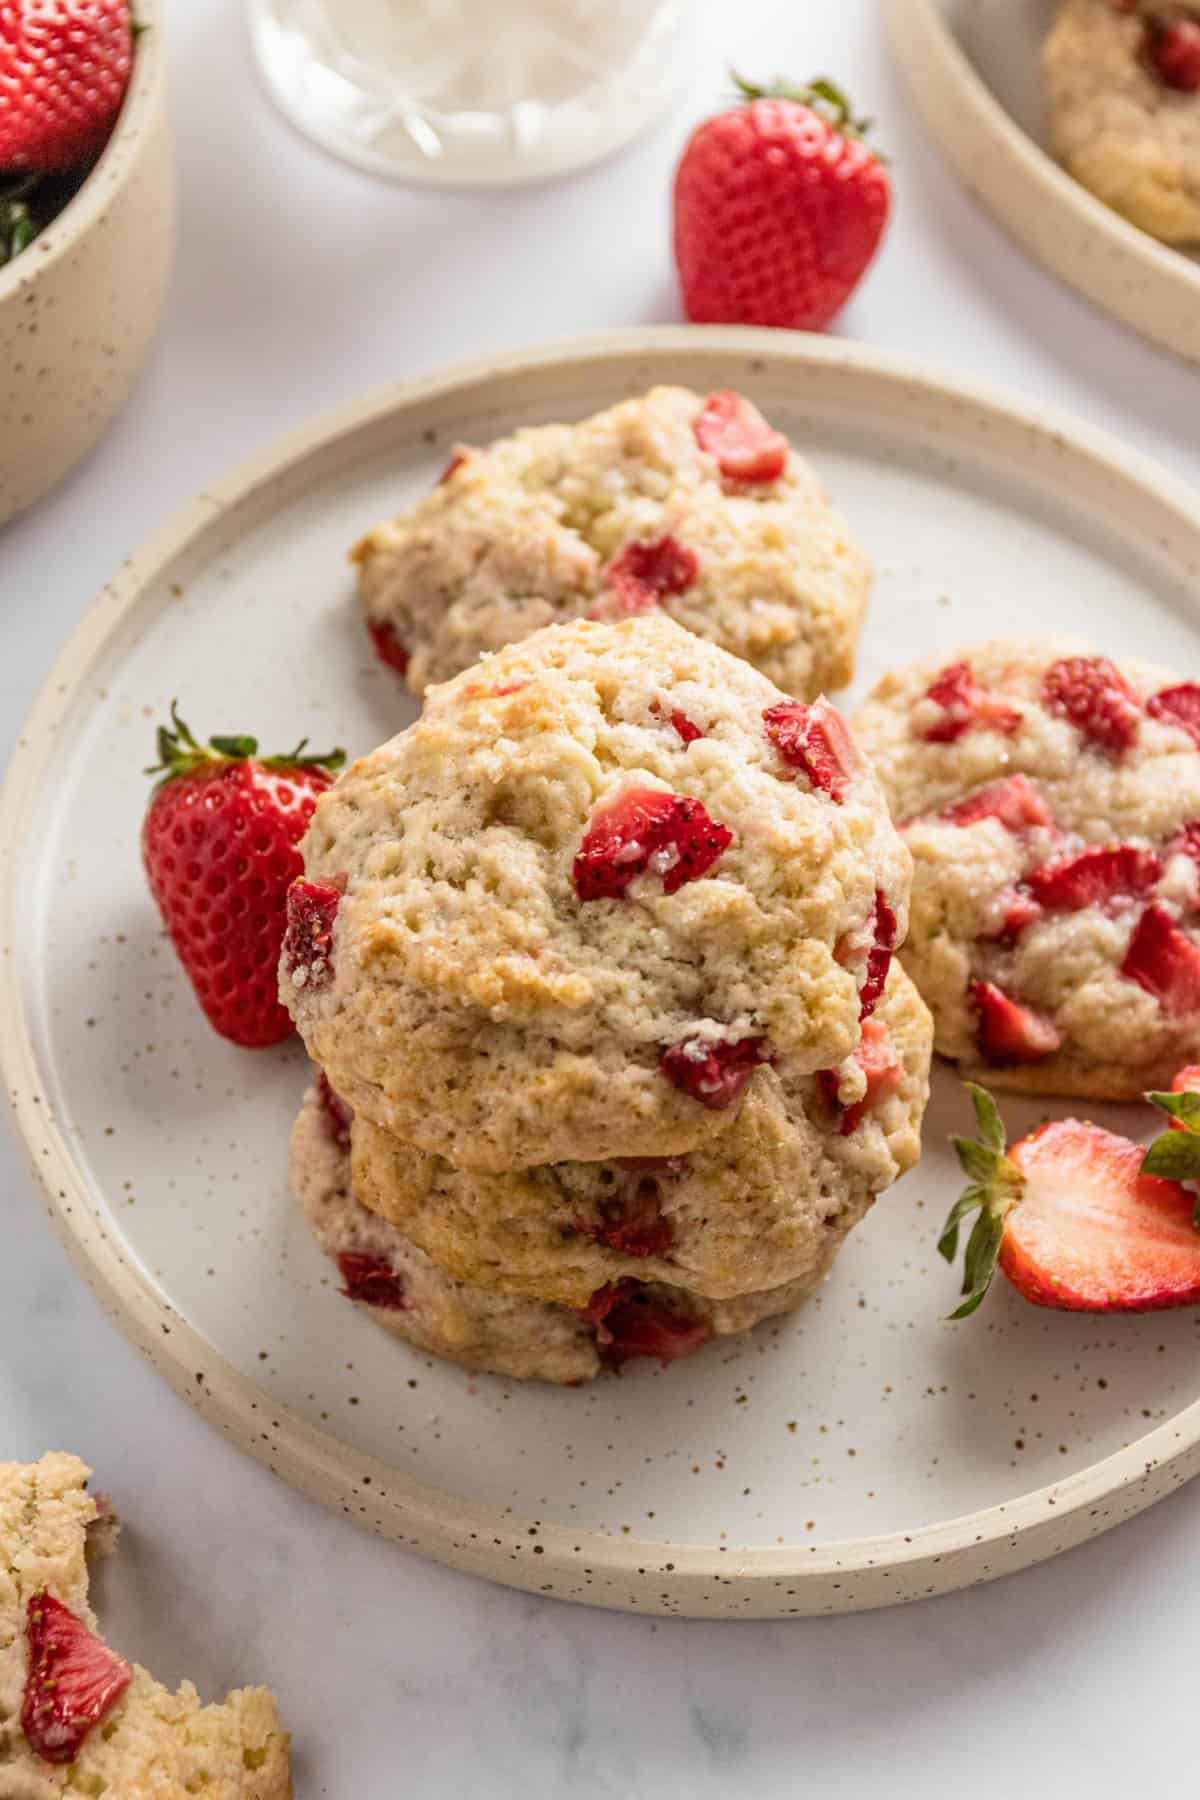 Angle view of the three stacked cookies on white plate with strawberries.